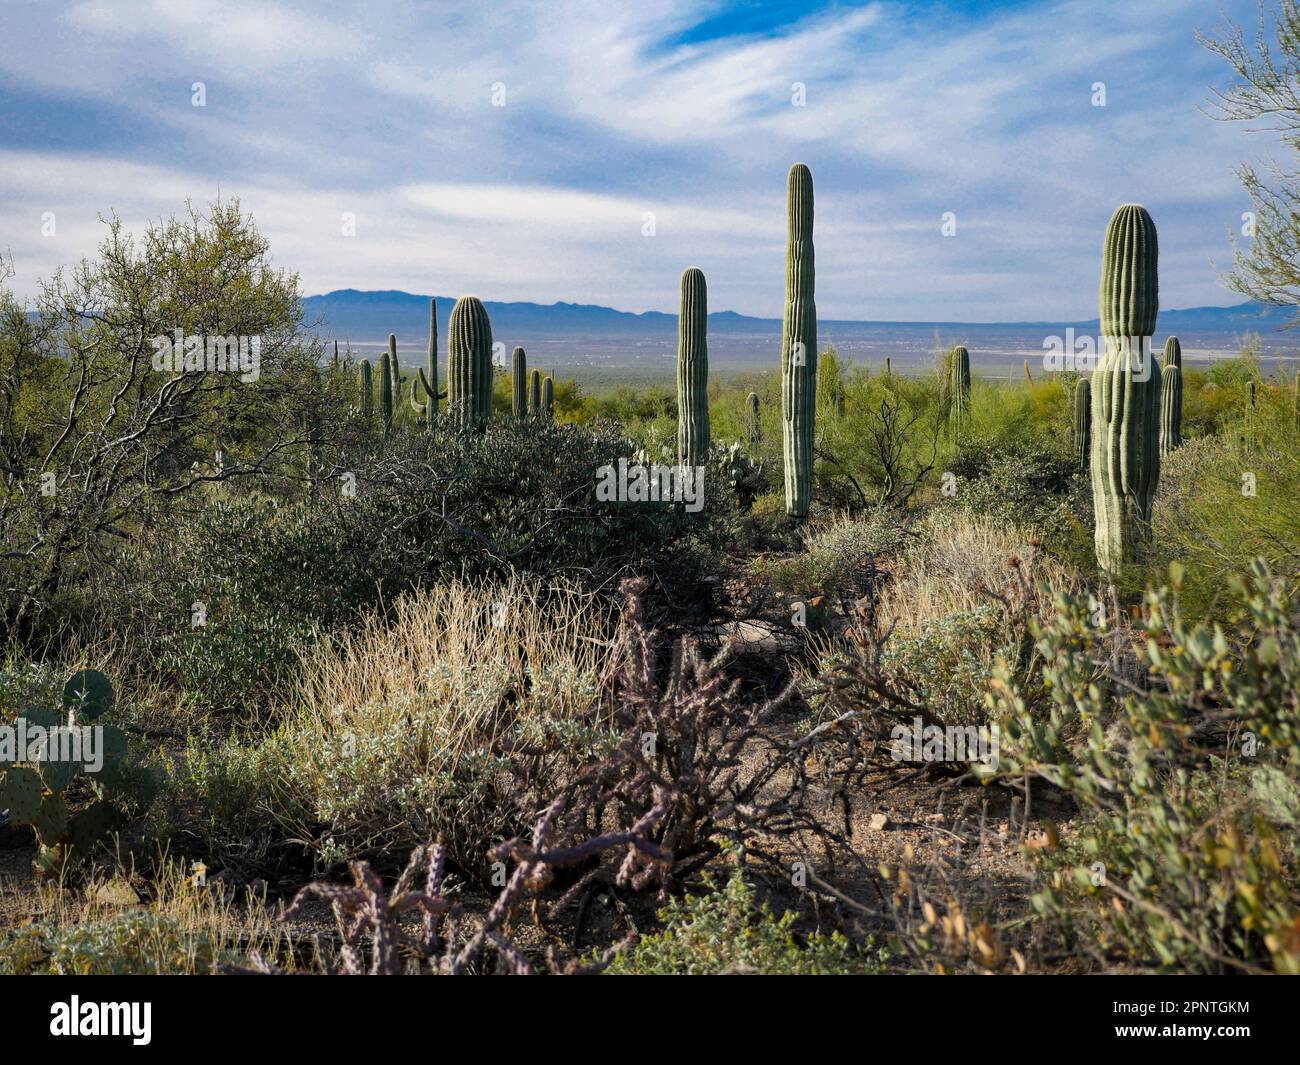 Saguaro (Carnegiea gigantea) is a tree-like cactus found that is endemic and found in the Sonoran Desert Stock Photo